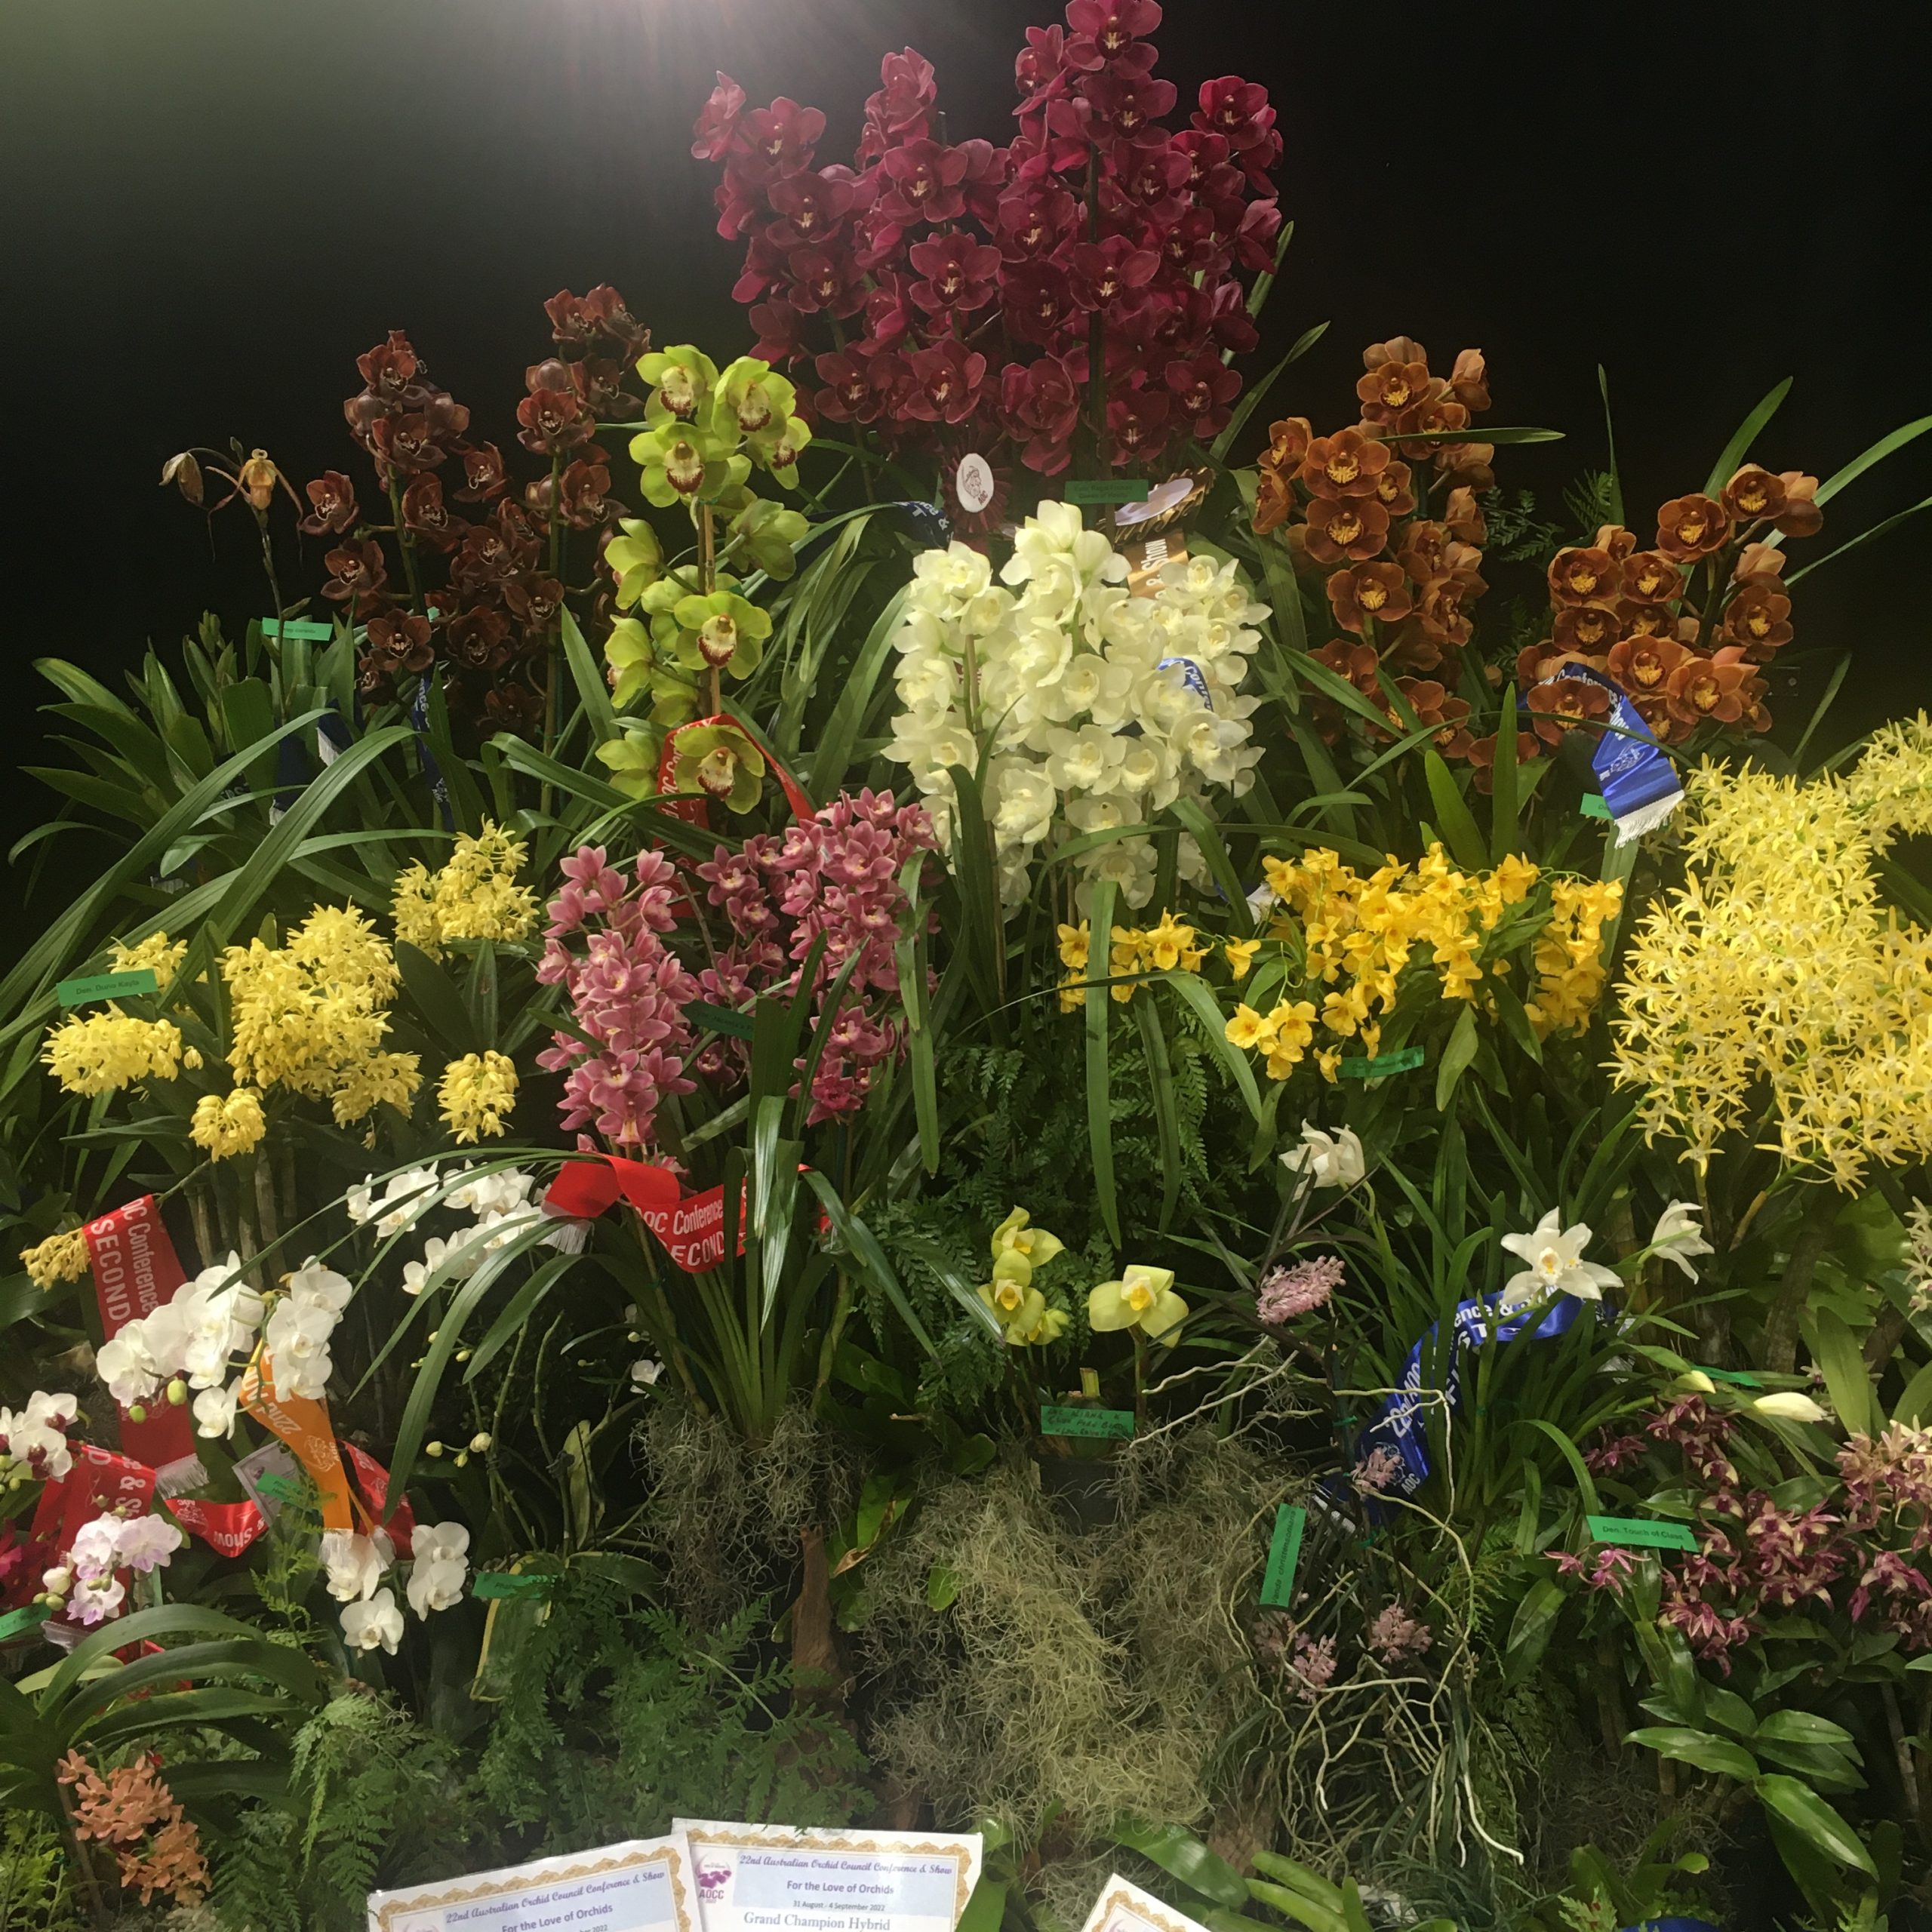 A display of orchids at an orchid show in Queensland Australia